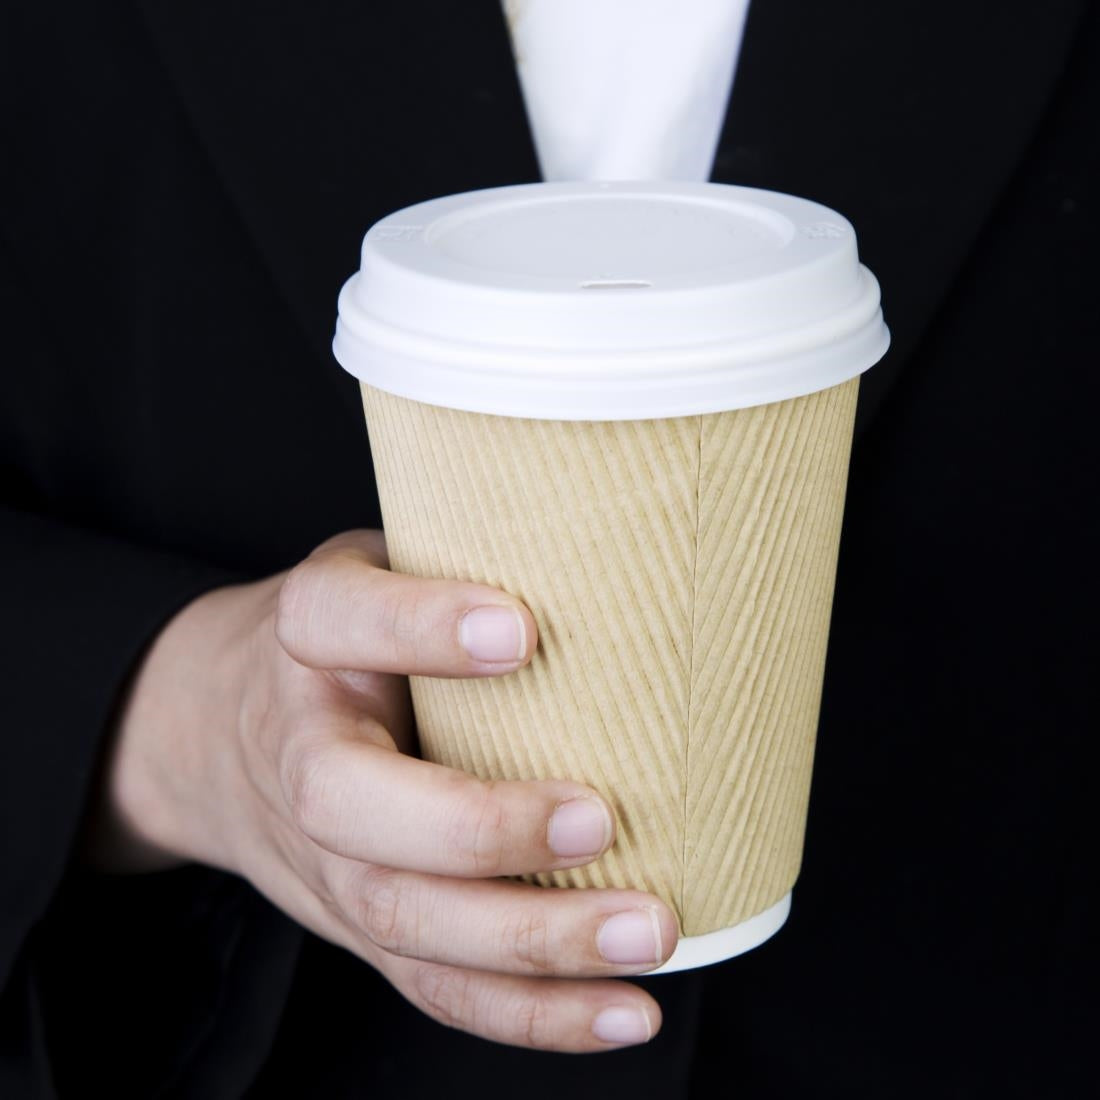 Fiesta Disposable Coffee Cup Lids White 340ml / 12oz and 455ml / 16oz (Pack of 50) JD Catering Equipment Solutions Ltd